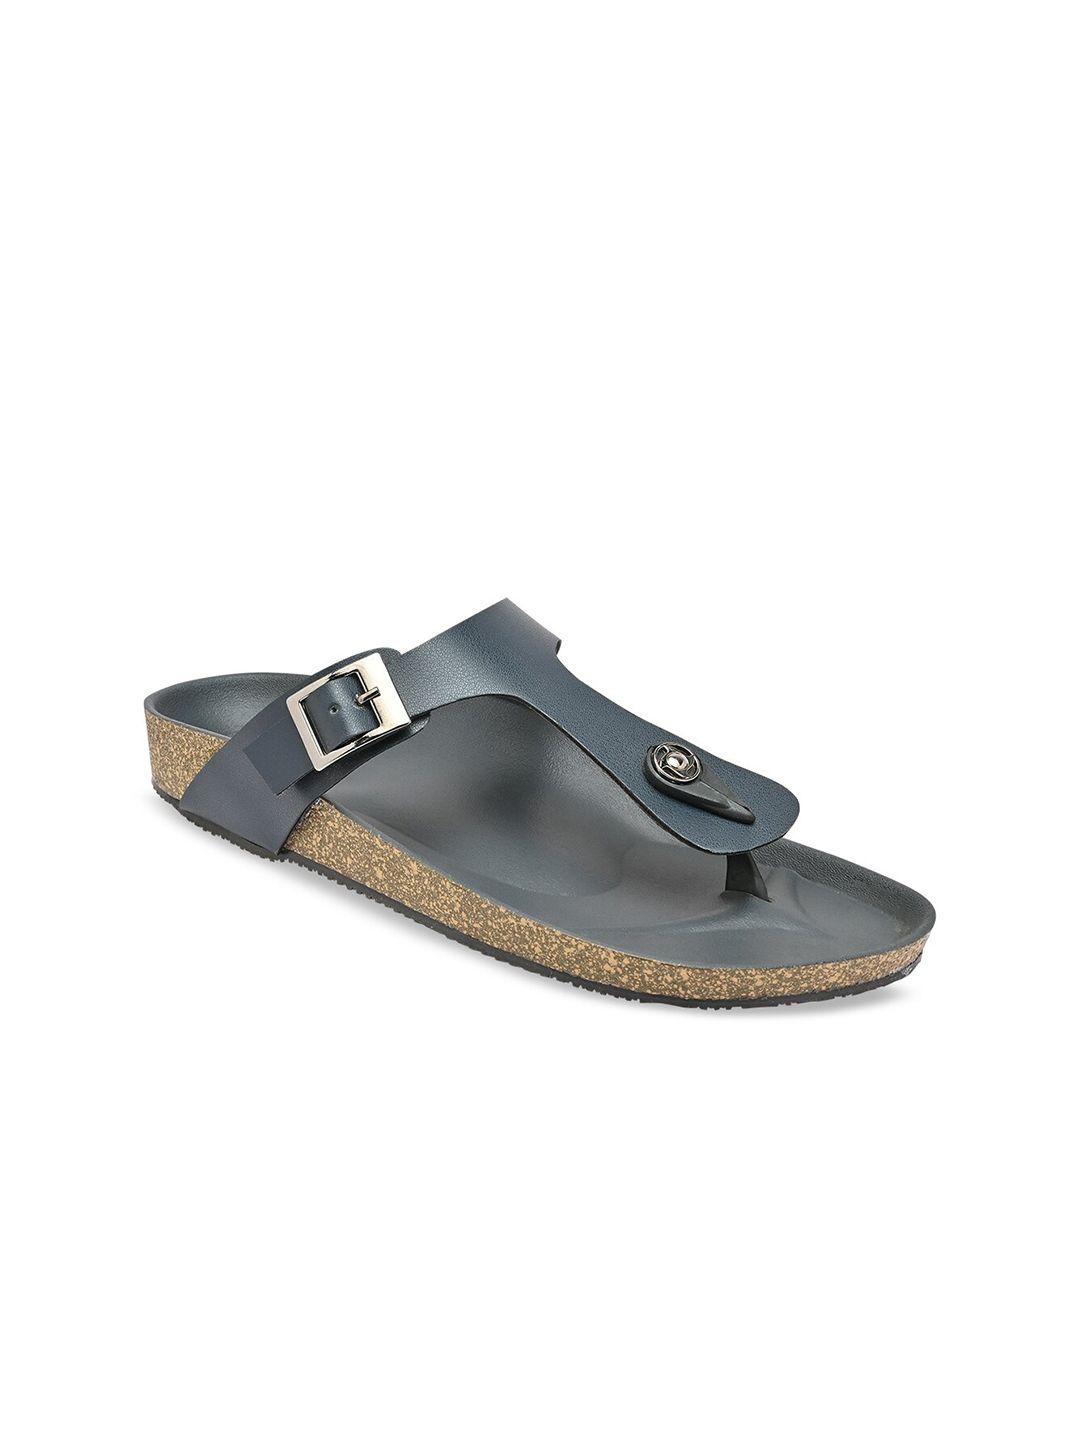 rocia women t-strap flats with buckles